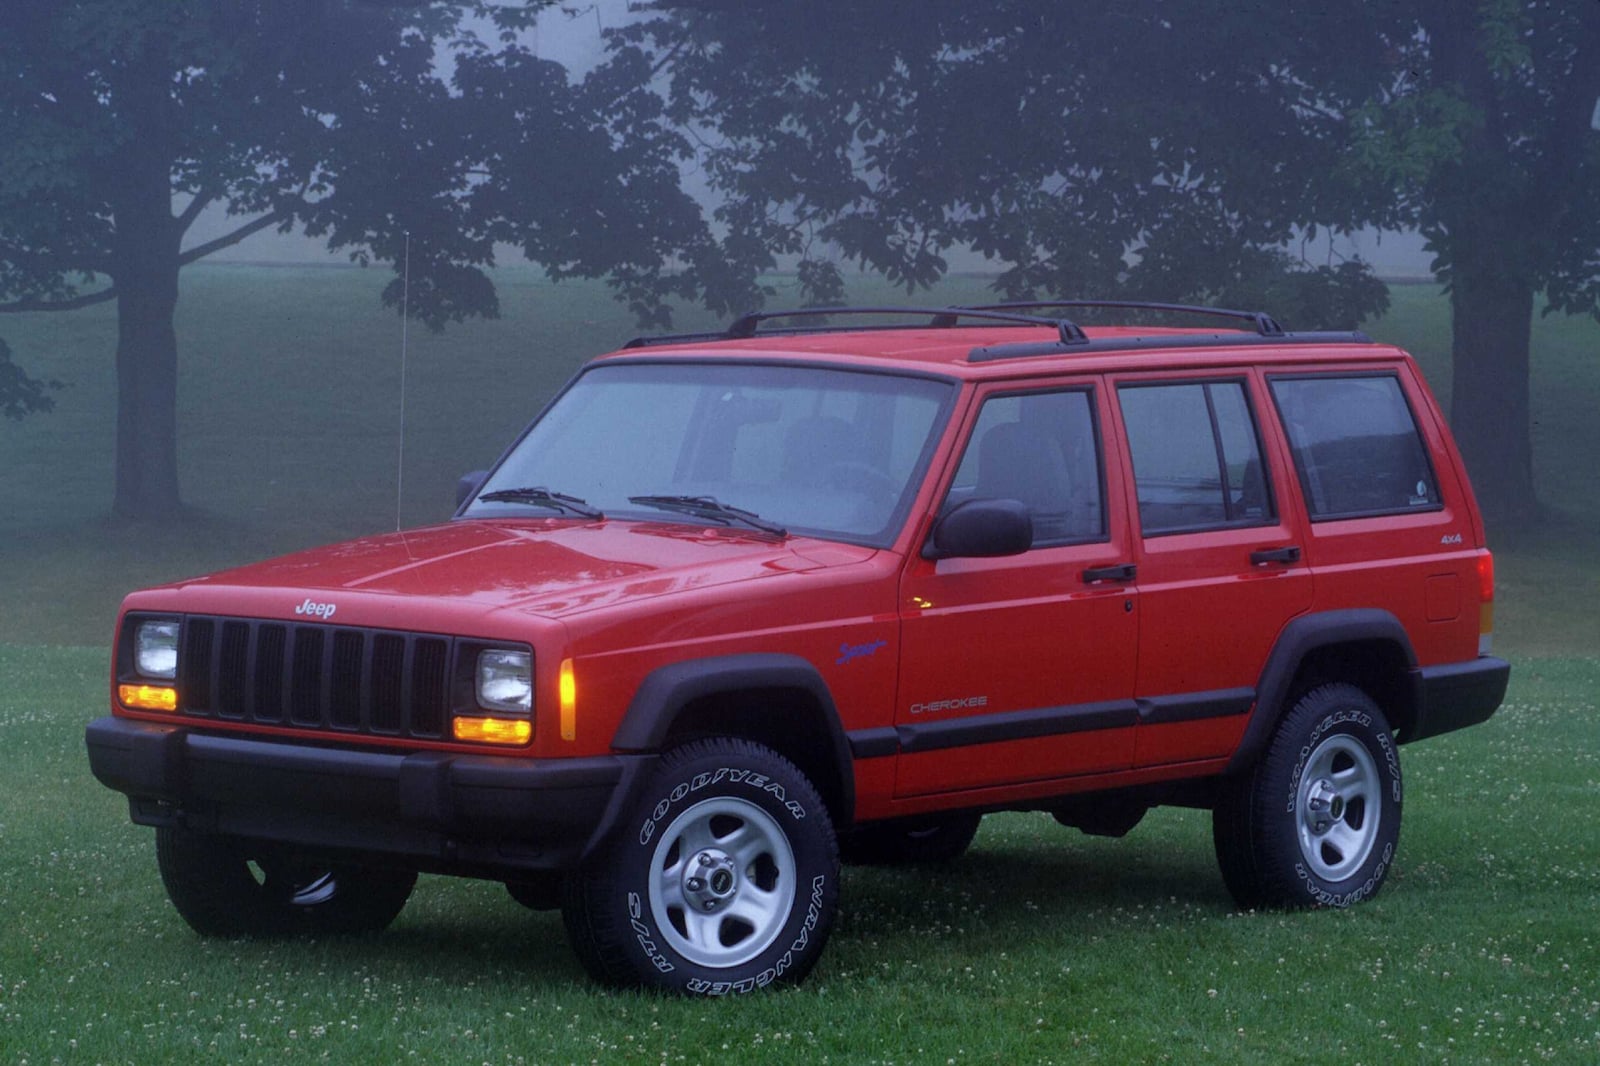 Troubleshooting the 2000 Jeep Cherokee: No BUS Code